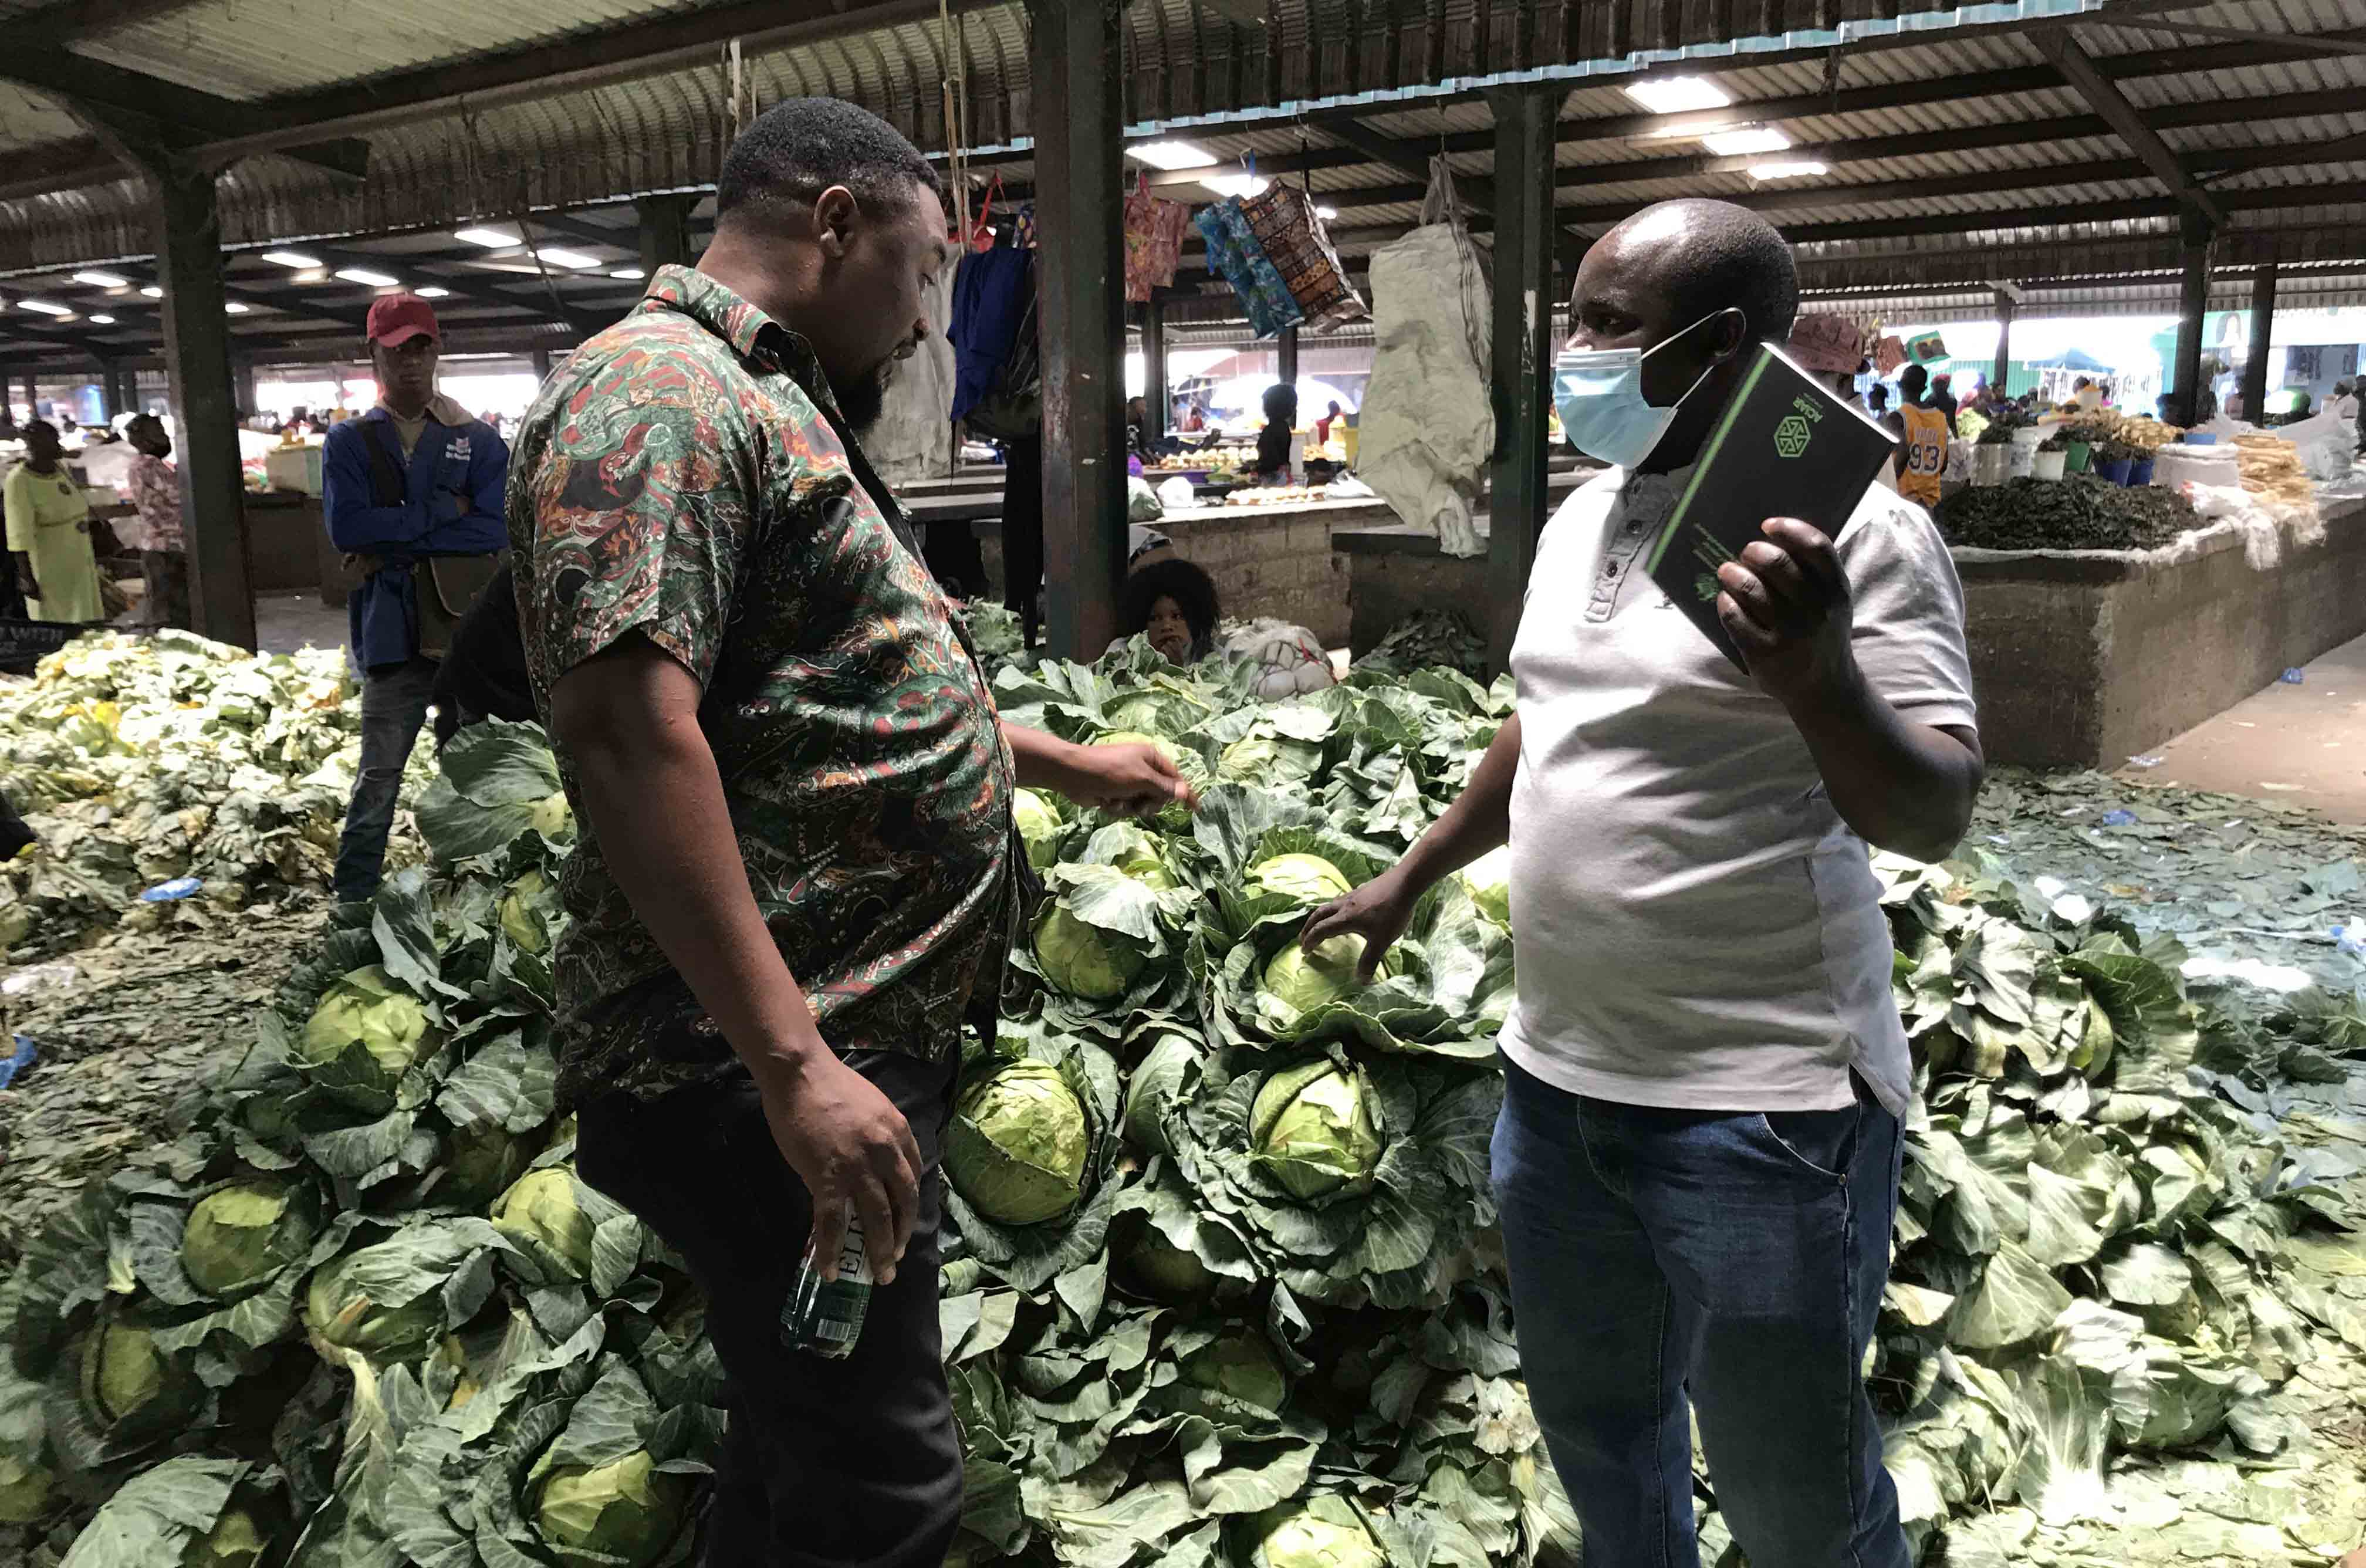 Researcher examining produce at markets in Lusaka, Zambia. 